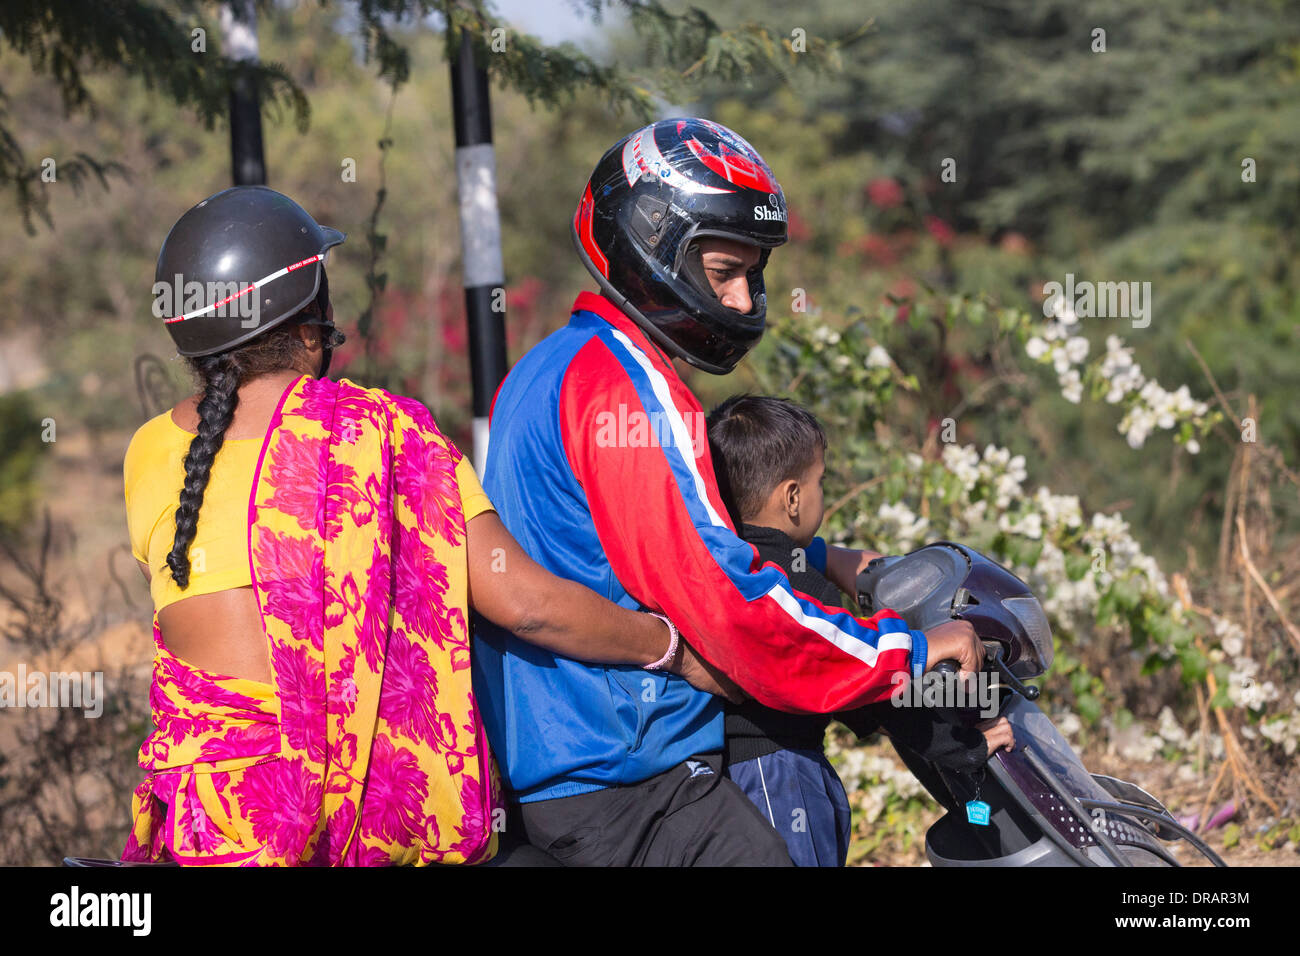 A family on a motorbike in Ahmedebad, India. Stock Photo